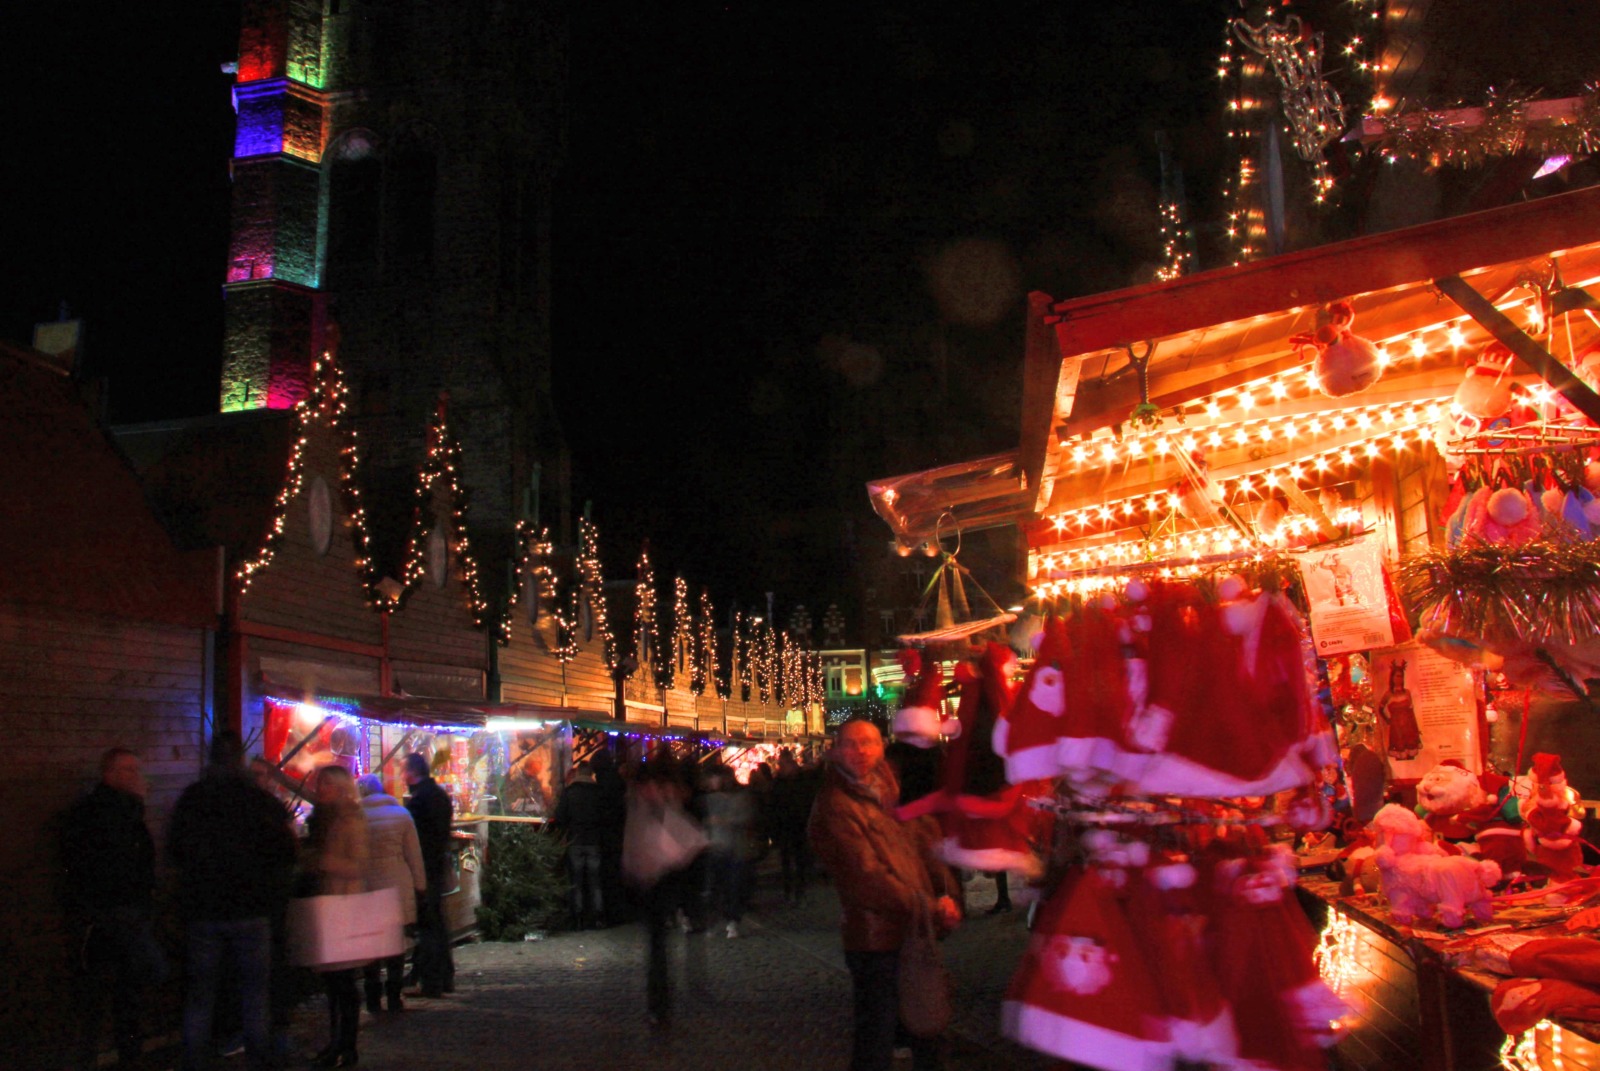 Bethune Christmas Market © Guillaume Baviere - licence [CC BY-SA 2.0] from Wikimedia Commons